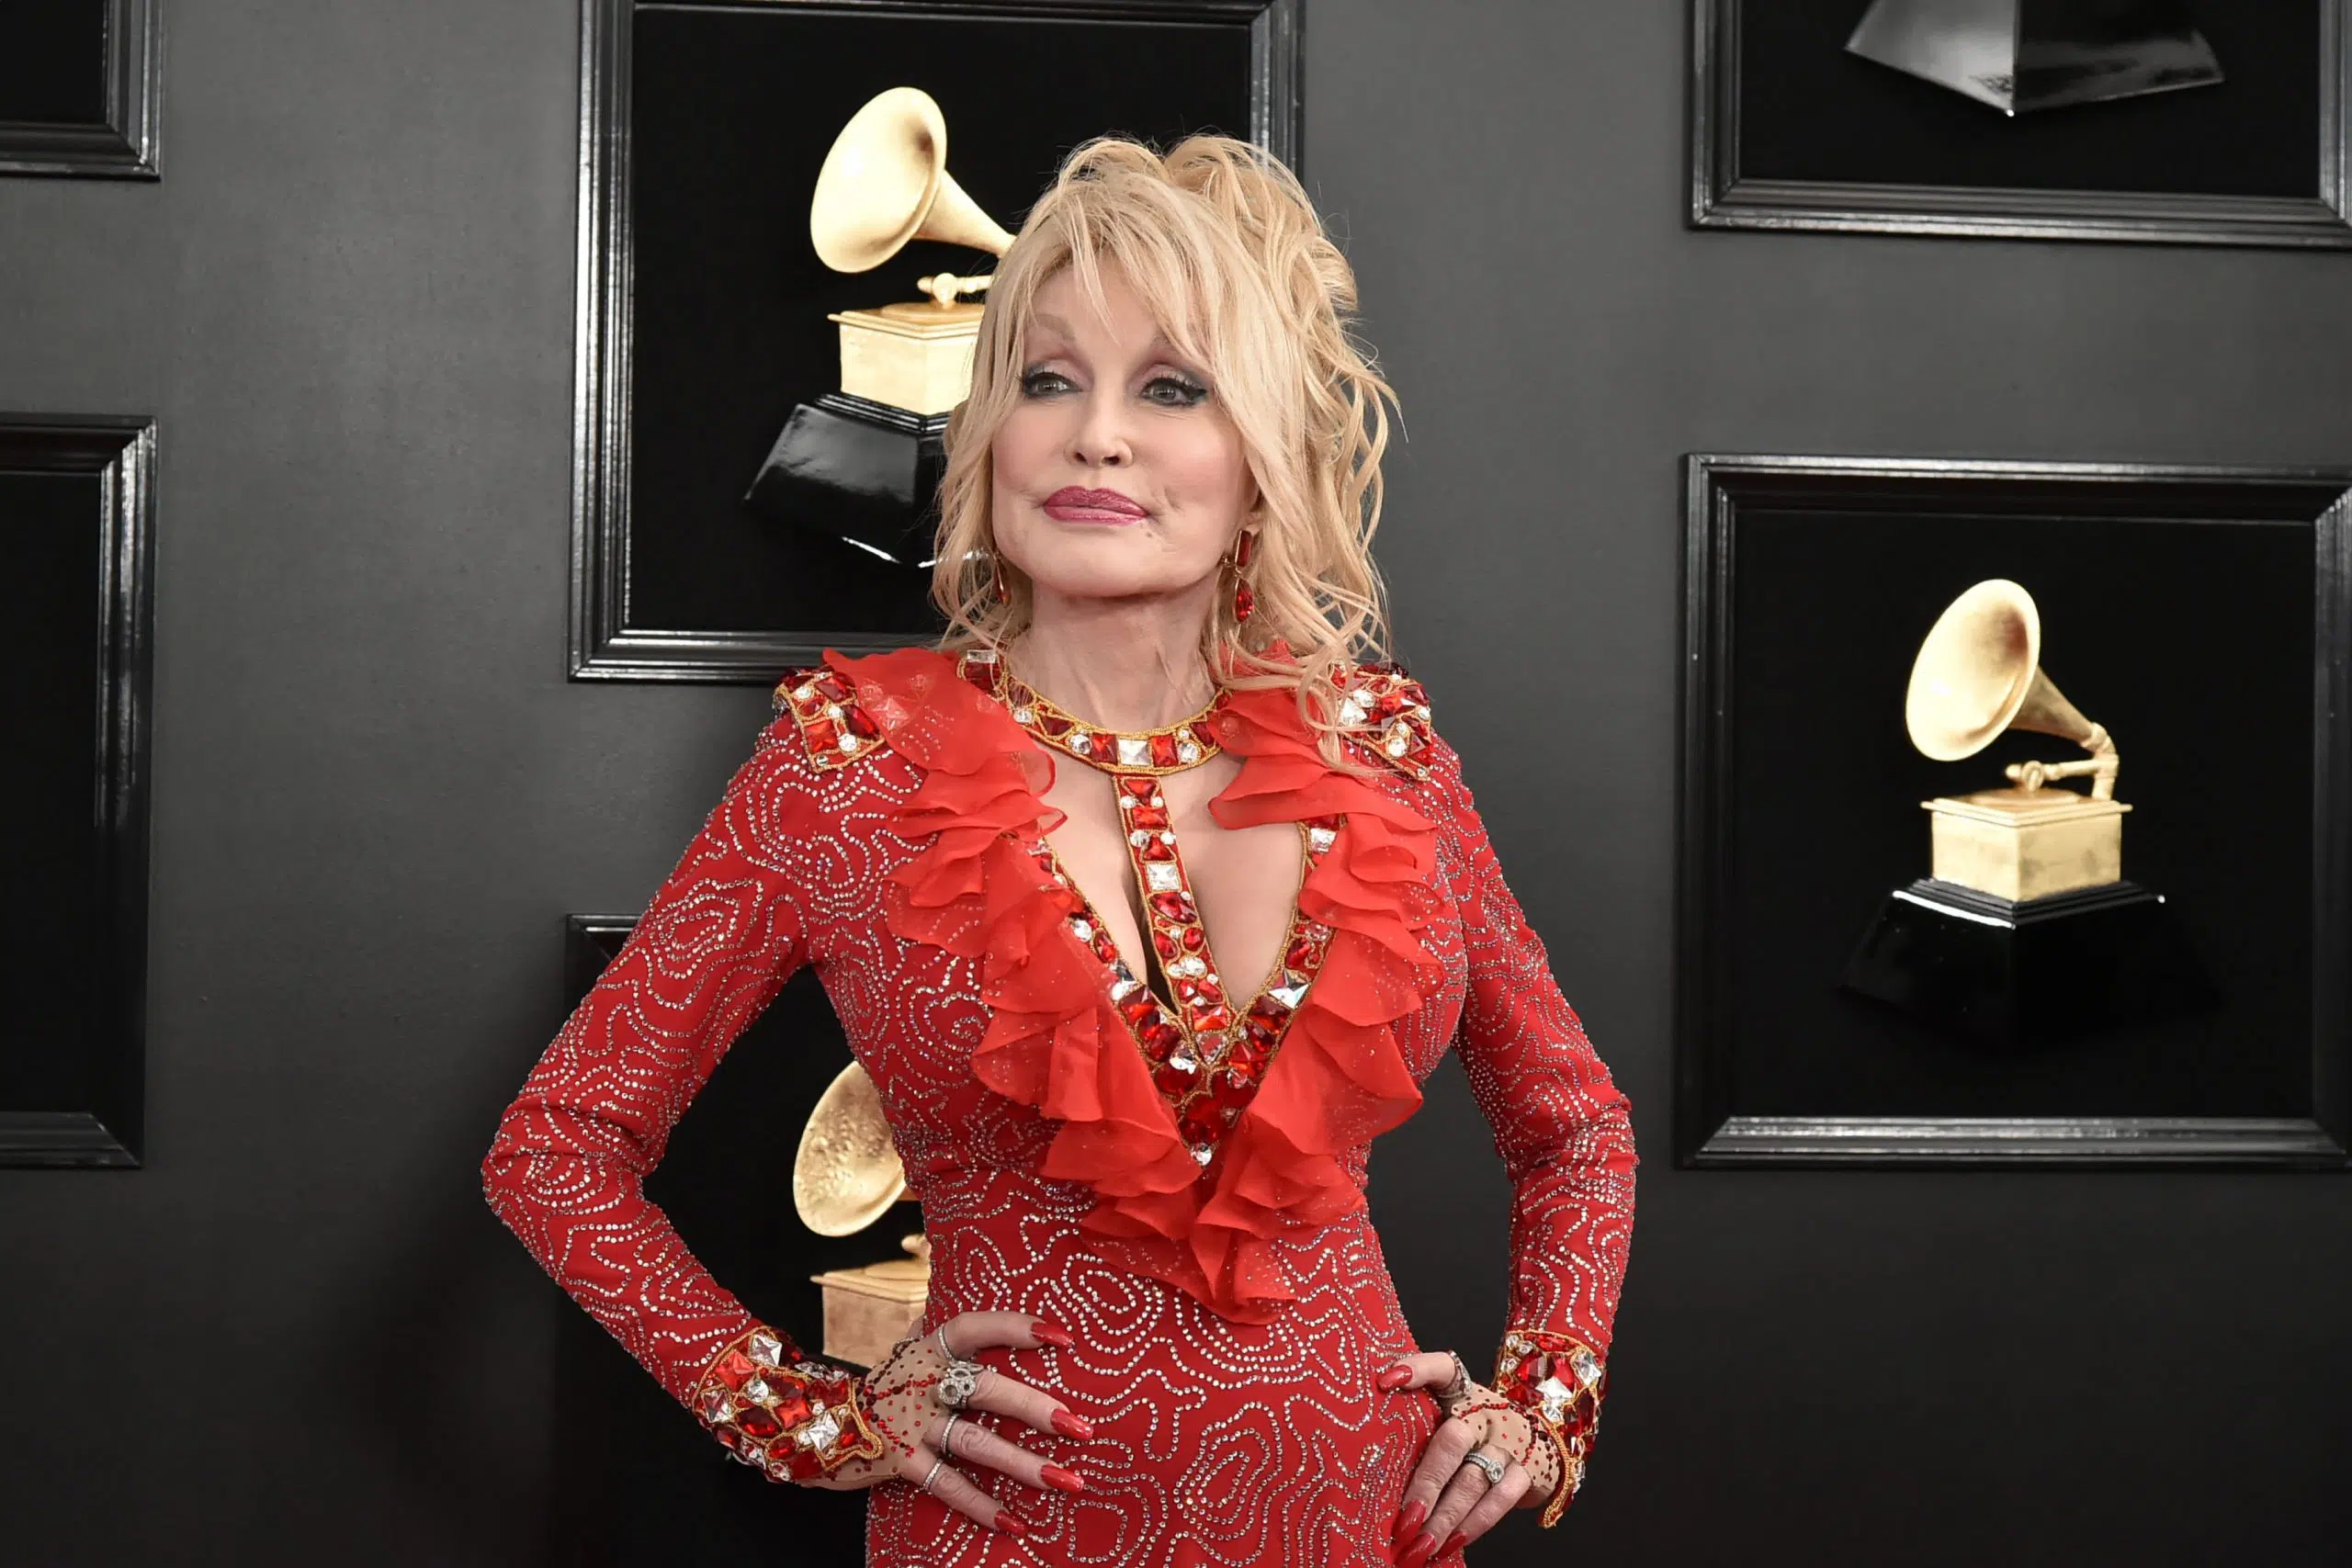 Dolly Parton Will Not Be Doing FullBlown Tours Anymore DRGNews